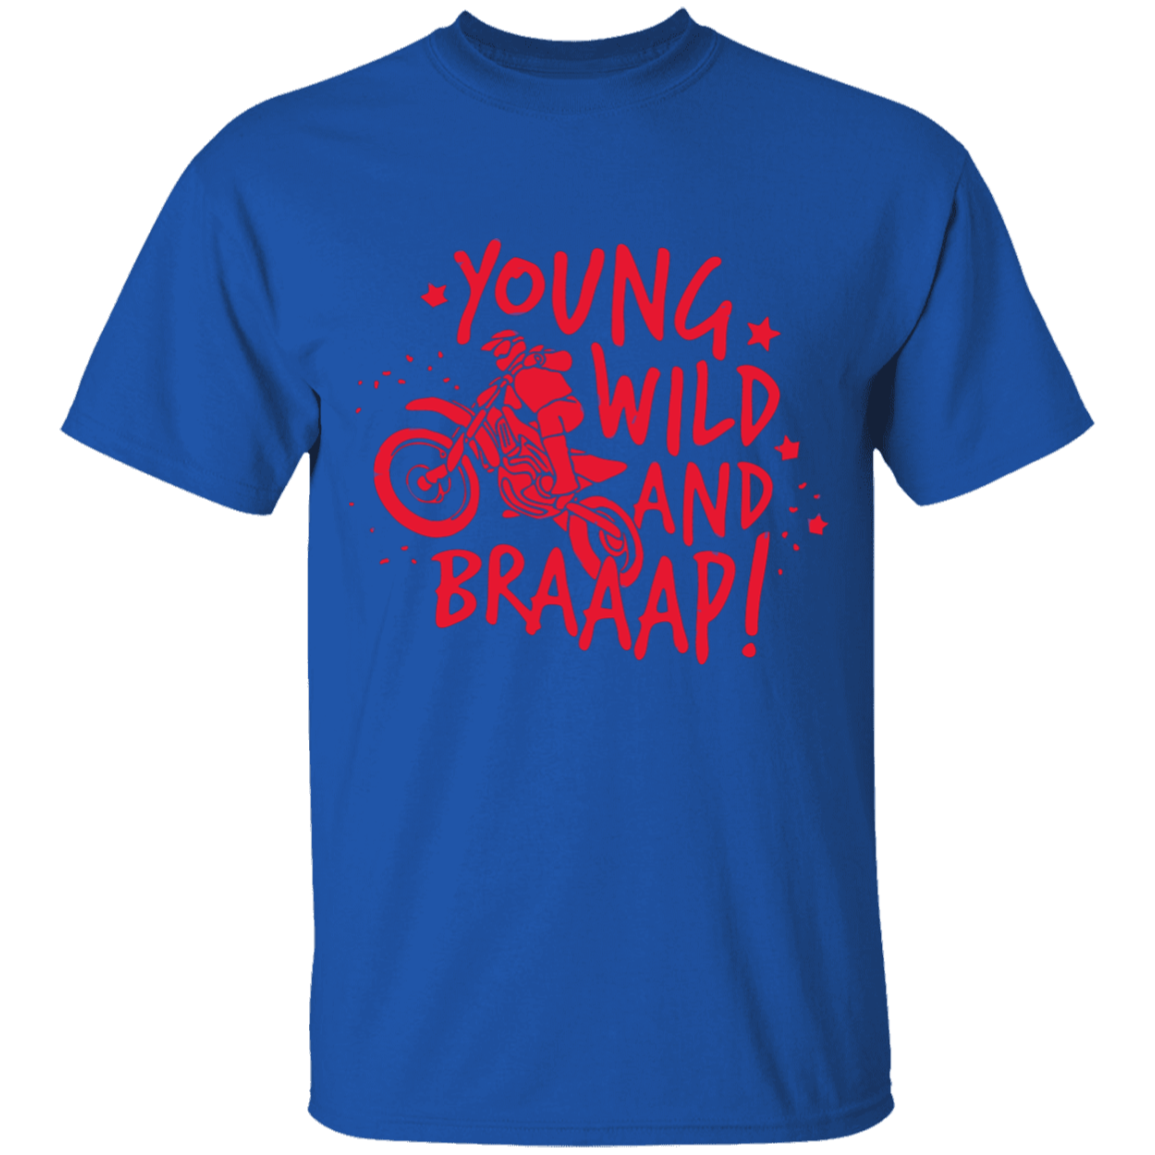 youth young and wild motorcycle short sleeve t'shirt